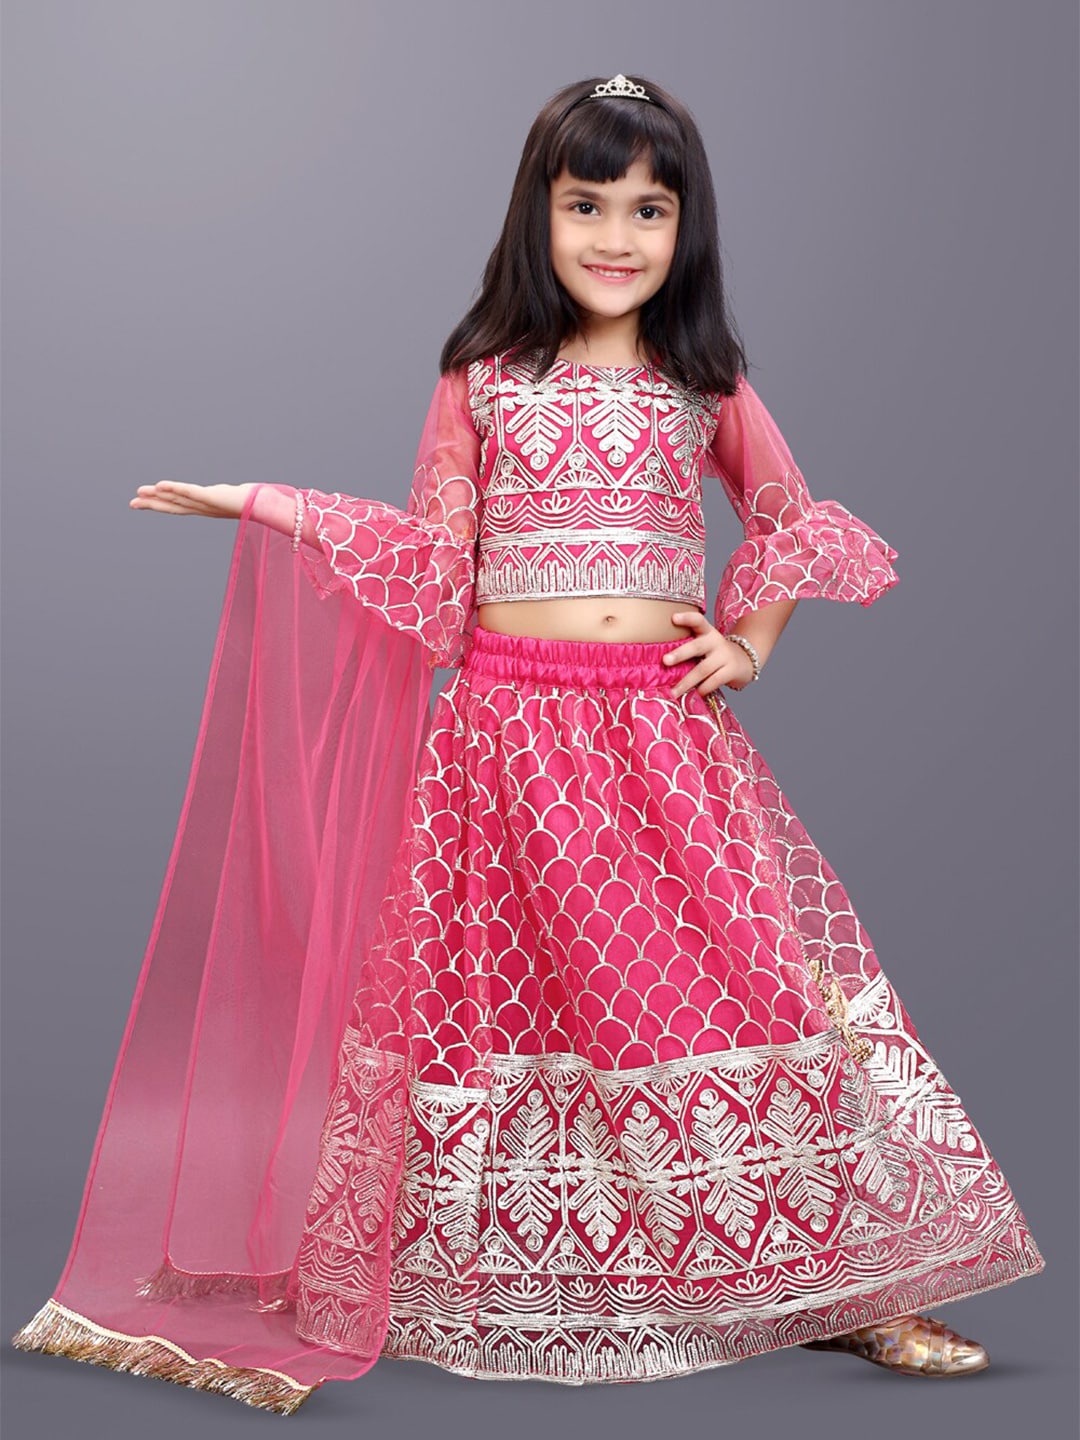 BAESD Girls Embroidered Ready To Wear Lehenga & Blouse With Dupatta Price in India